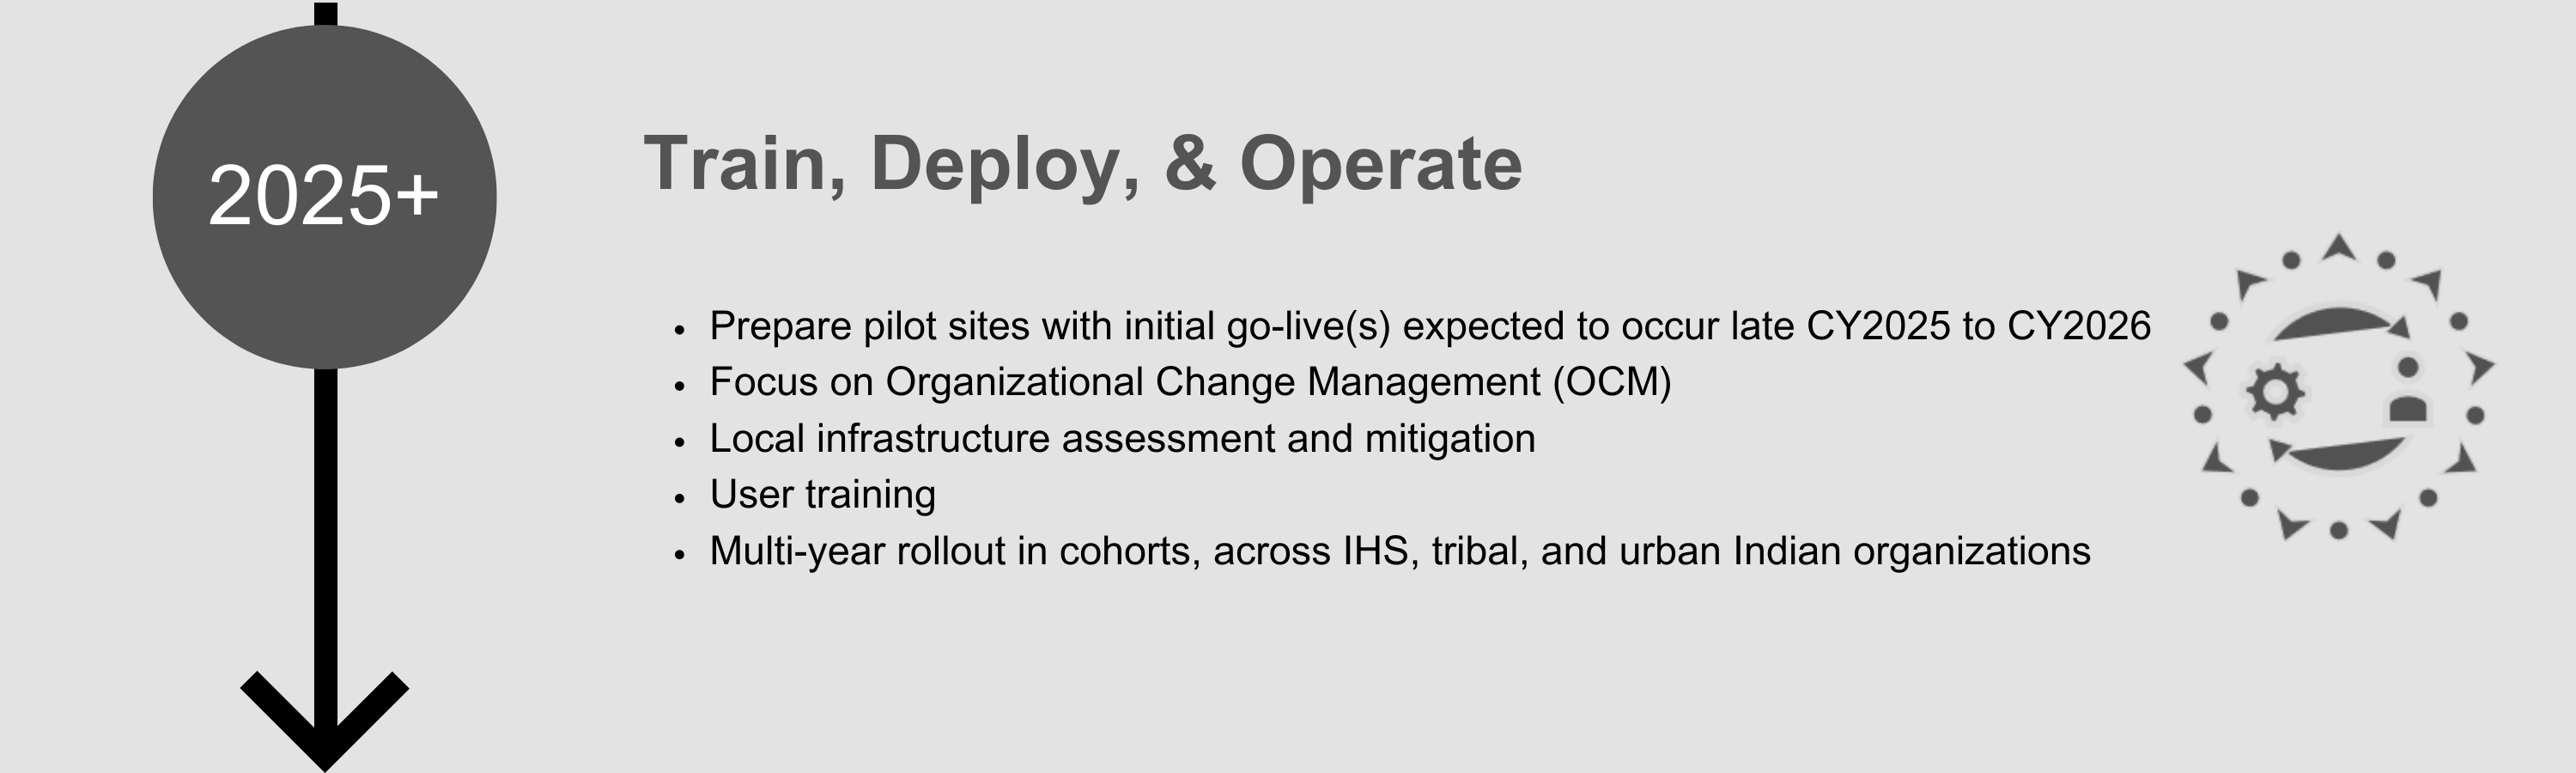 Train, Deploy, and Operate (2025+)
- Prepare pilot sites with initial go-live(s) expected to occur late CY2025 to CY2026 
- Focus on Organizational Change Management (OCM) 
- Local infrastructure assessment and mitigation 
- User training 
- Multi-year rollout in cohorts, across IHS, tribal, and urban Indian organizations
  